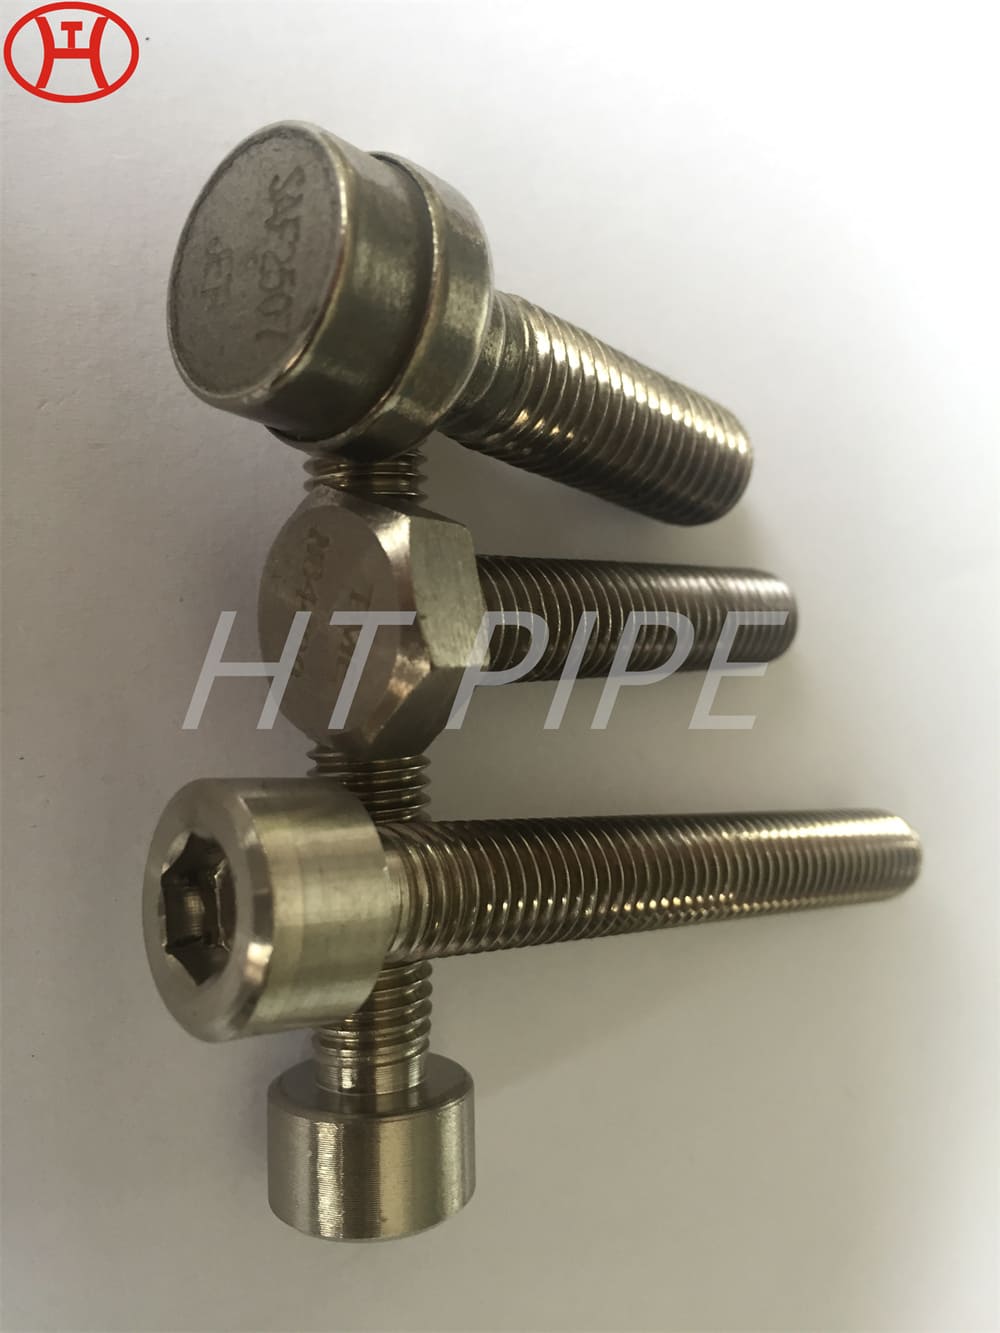 special alloy Alloy 926 Incoloy 25-6Mo N08926 Incoloy 926 1.4529 round head hex bolt